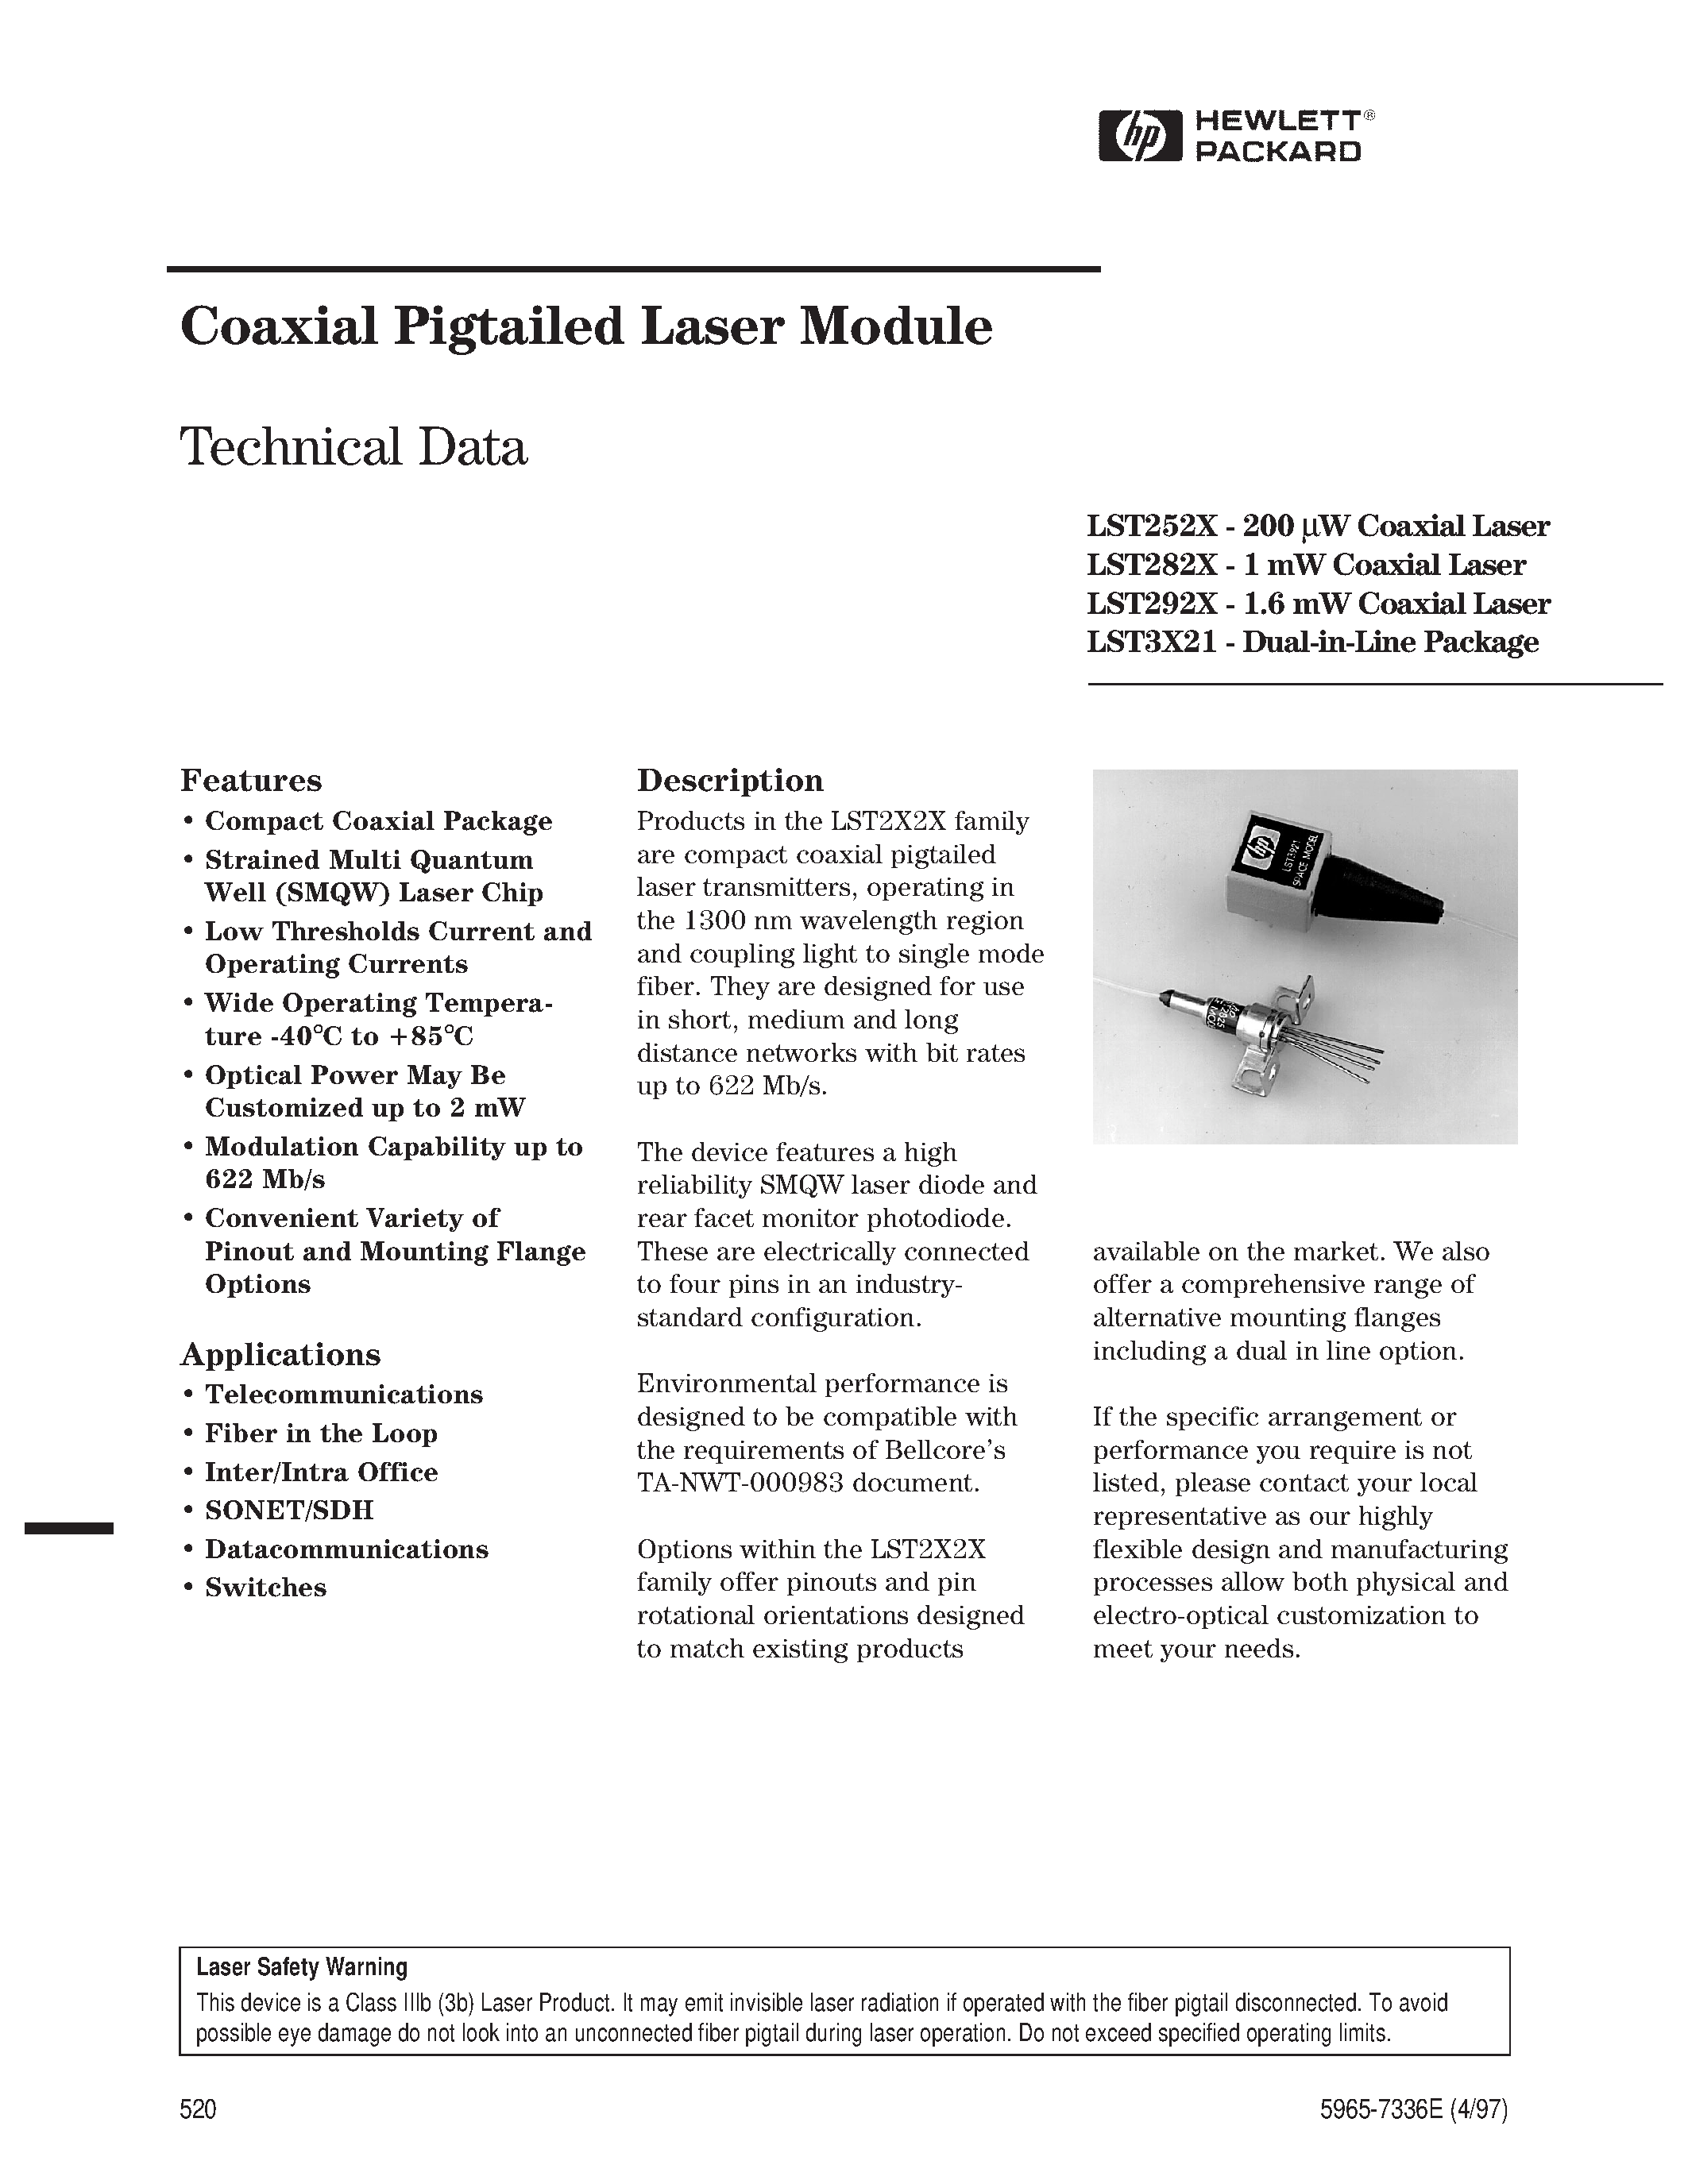 Datasheet LST2925-S4-T-FP - Coaxial Pigtailed Laser Module page 1